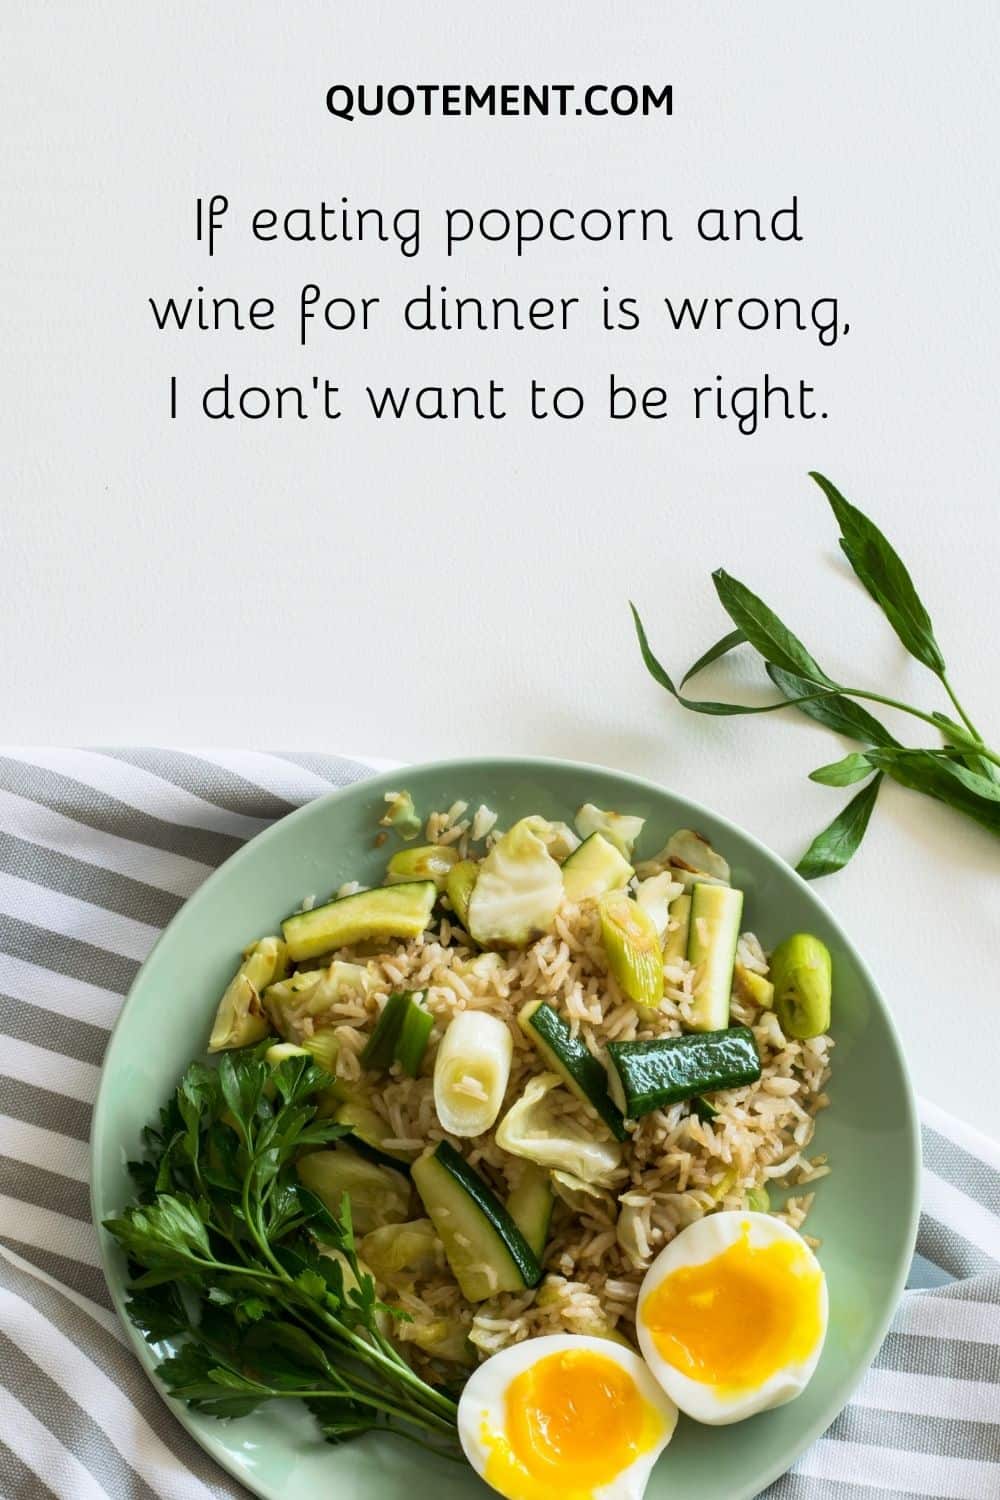 If eating popcorn and wine for dinner is wrong, I don’t want to be right